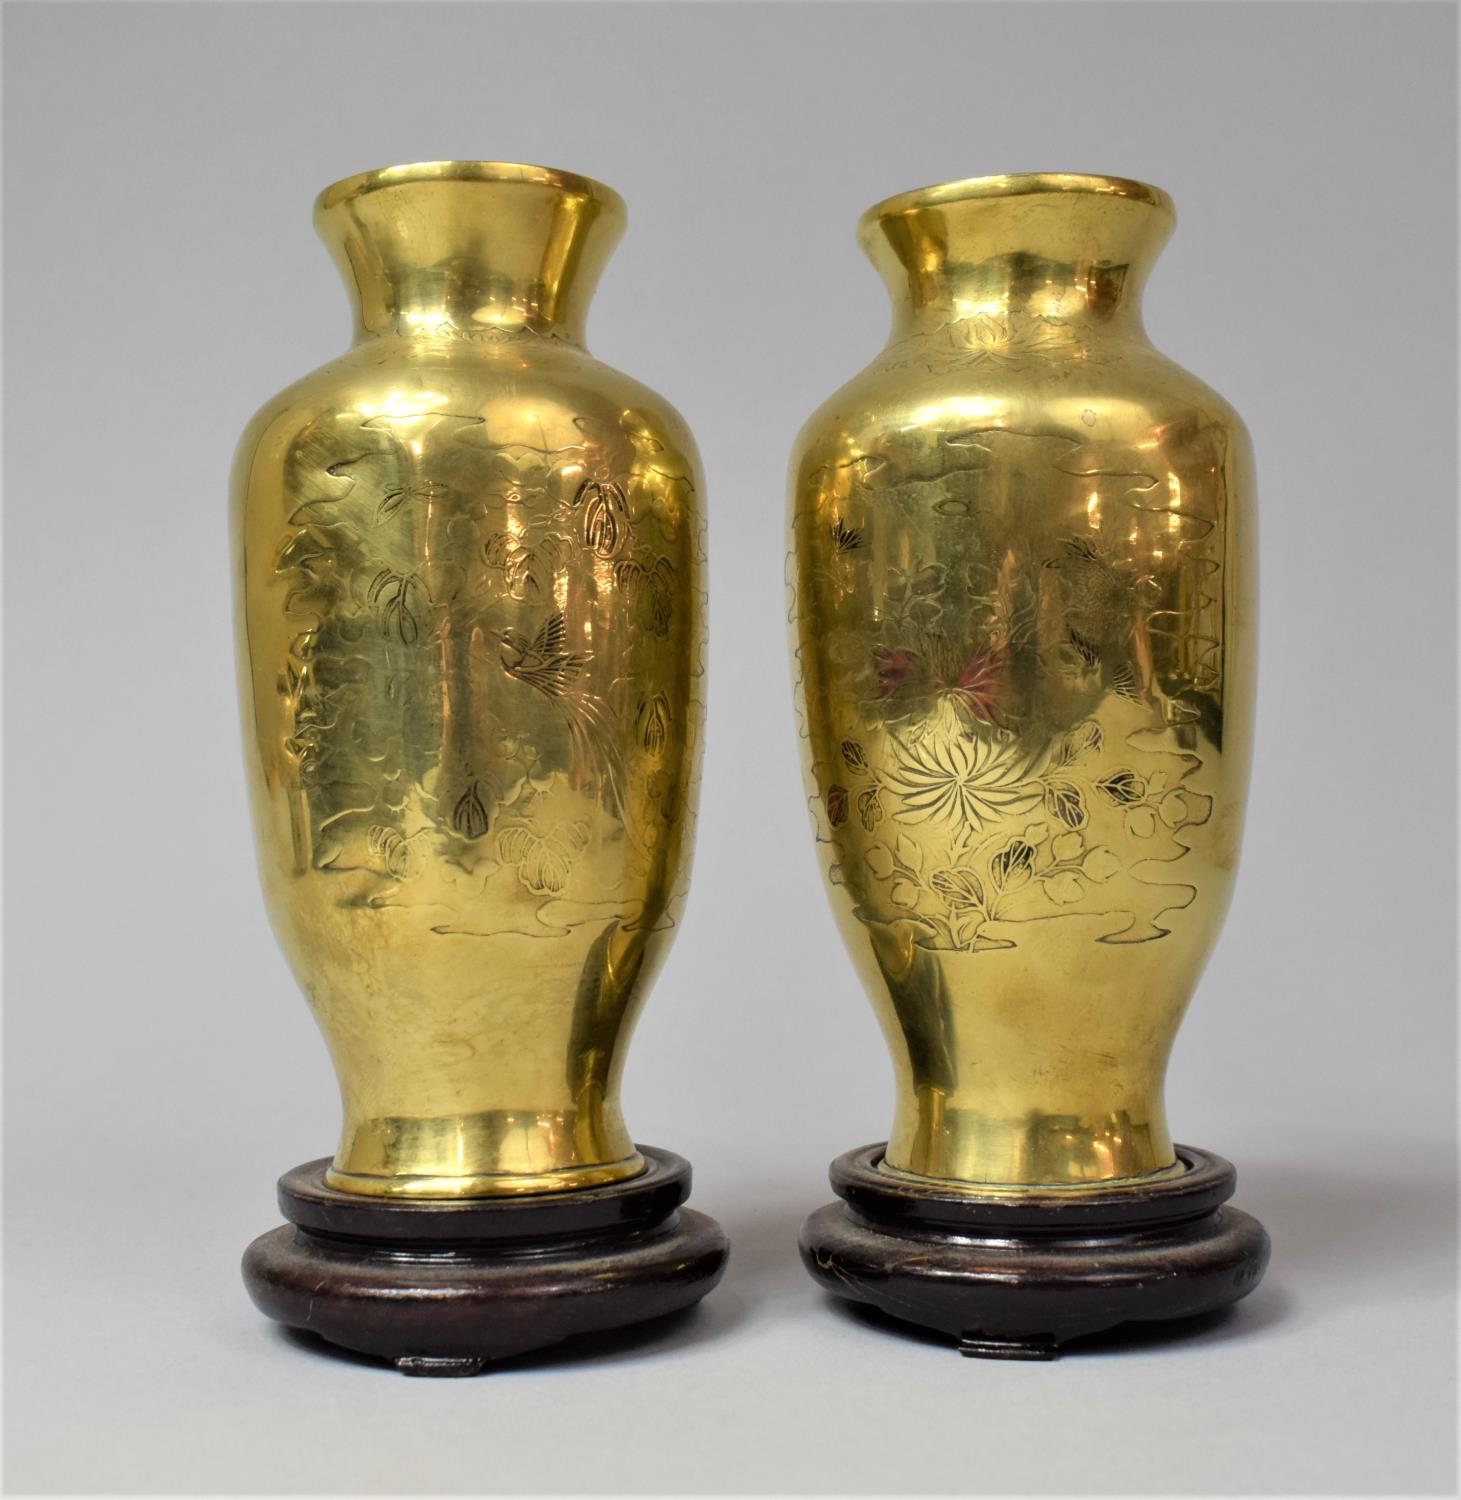 A Pair of Early Chinese Bronze Vases Decorated with Chrysanthemums and Birds and Butterflies Among